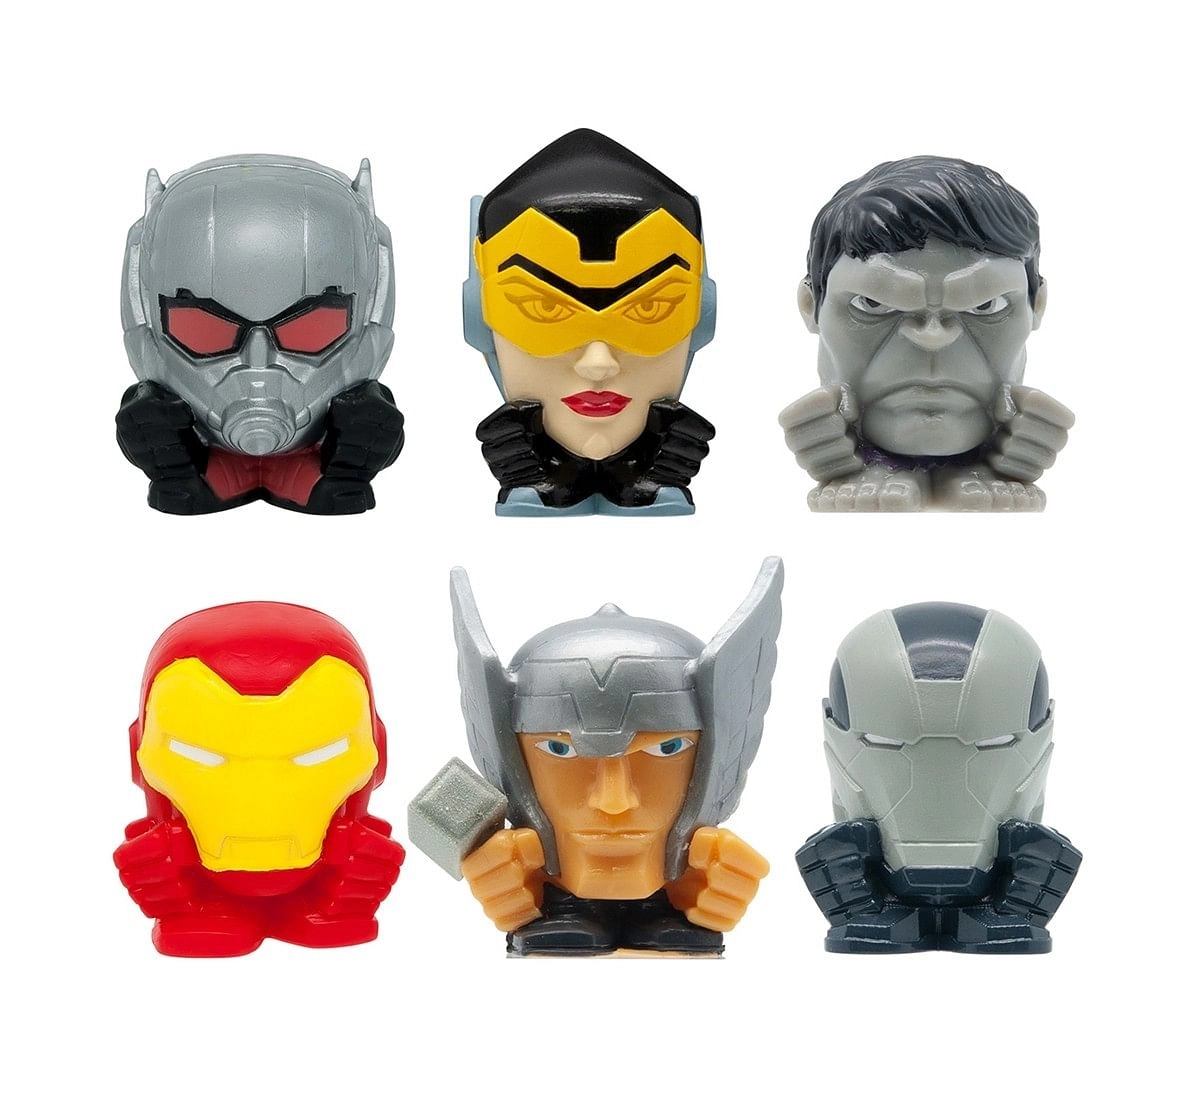 Mash'Ems Squishy Marvel Avengers S8 Toy Figures for Kids age 4Y+ 